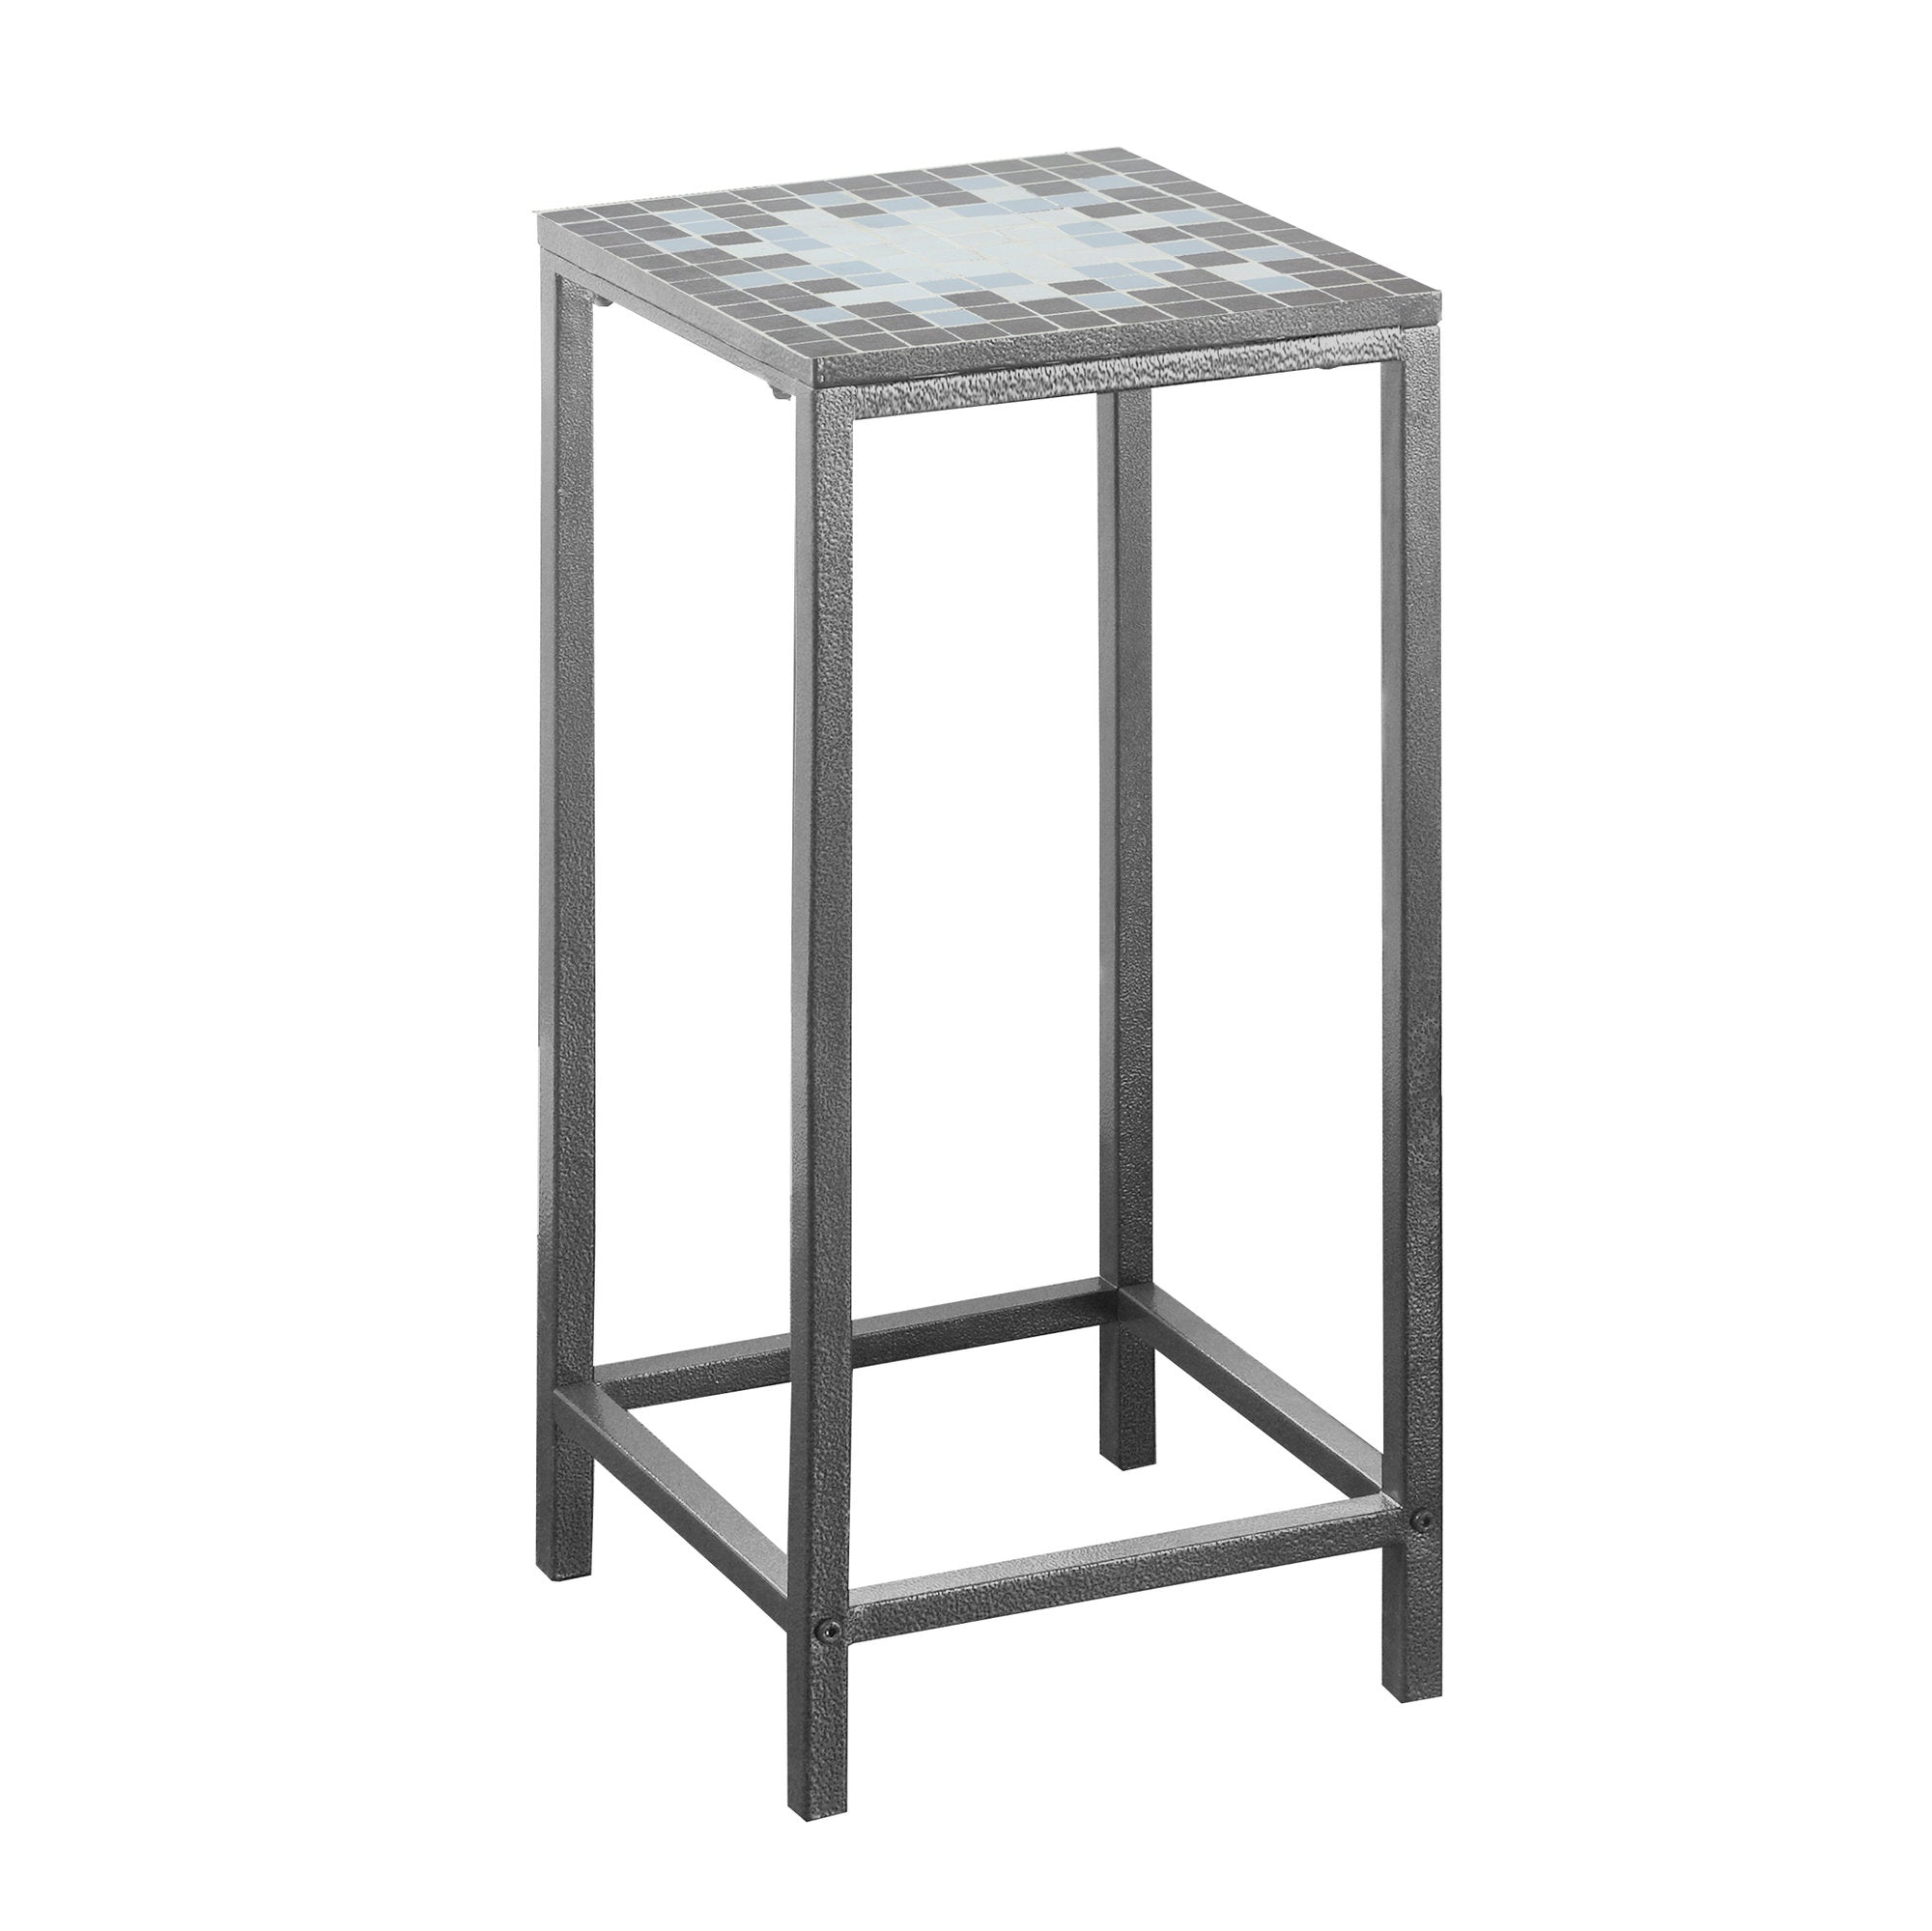 MN-473145    Accent Table, Side, End, Plsant Stand, Square, Living Room, Bedroom, Metal Legs, Tile, Black, Blue, Transitional